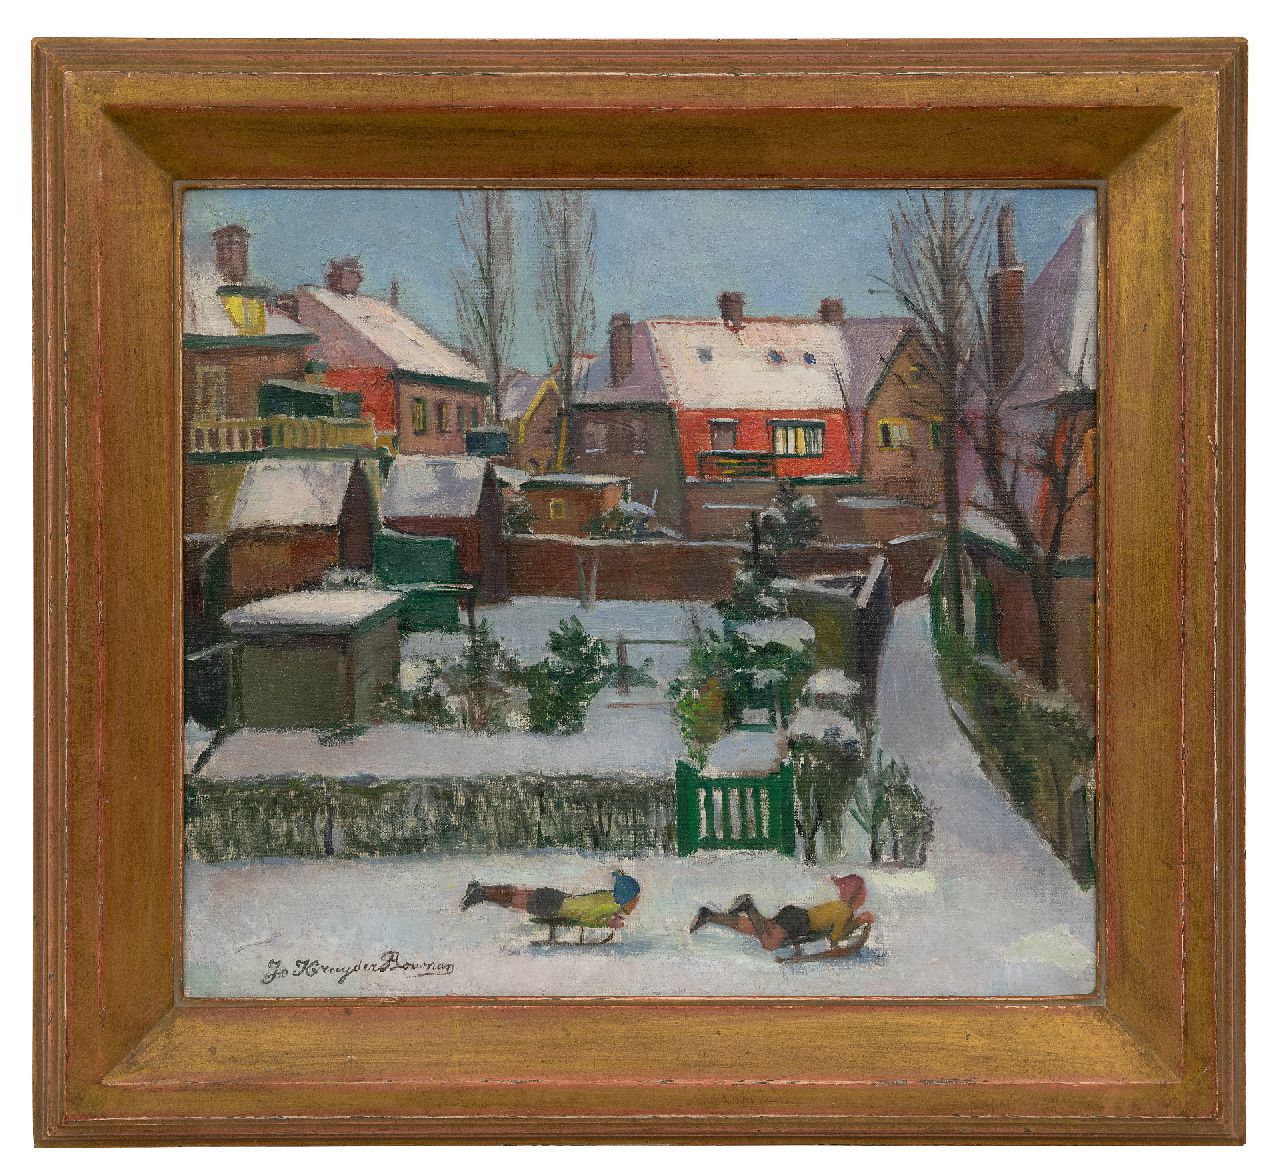 Kruyder-Bouman J.L.  | Johanna Laura 'Jo' Kruyder-Bouman | Paintings offered for sale | Sledding through town, oil on canvas 40.3 x 45.0 cm, signed l.l. and dated 1942